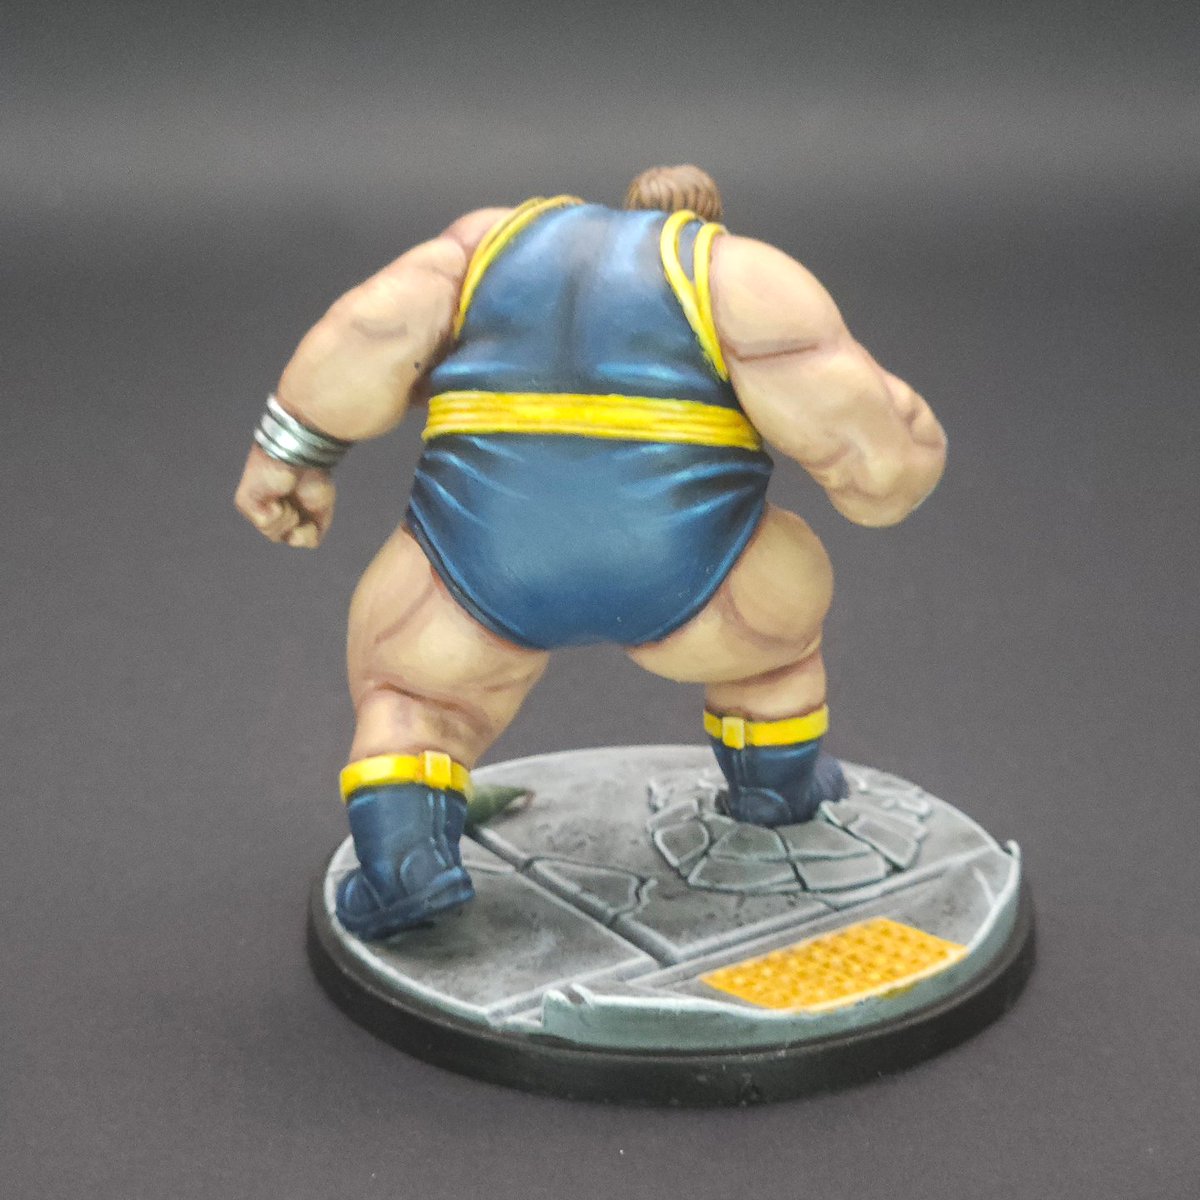 Fred Dukes, aka The Blob from Marvel Crisis Protocol by @atomicmassgames 

#paintingprotocol #paintingminiatures #marvelcrisisprotocol